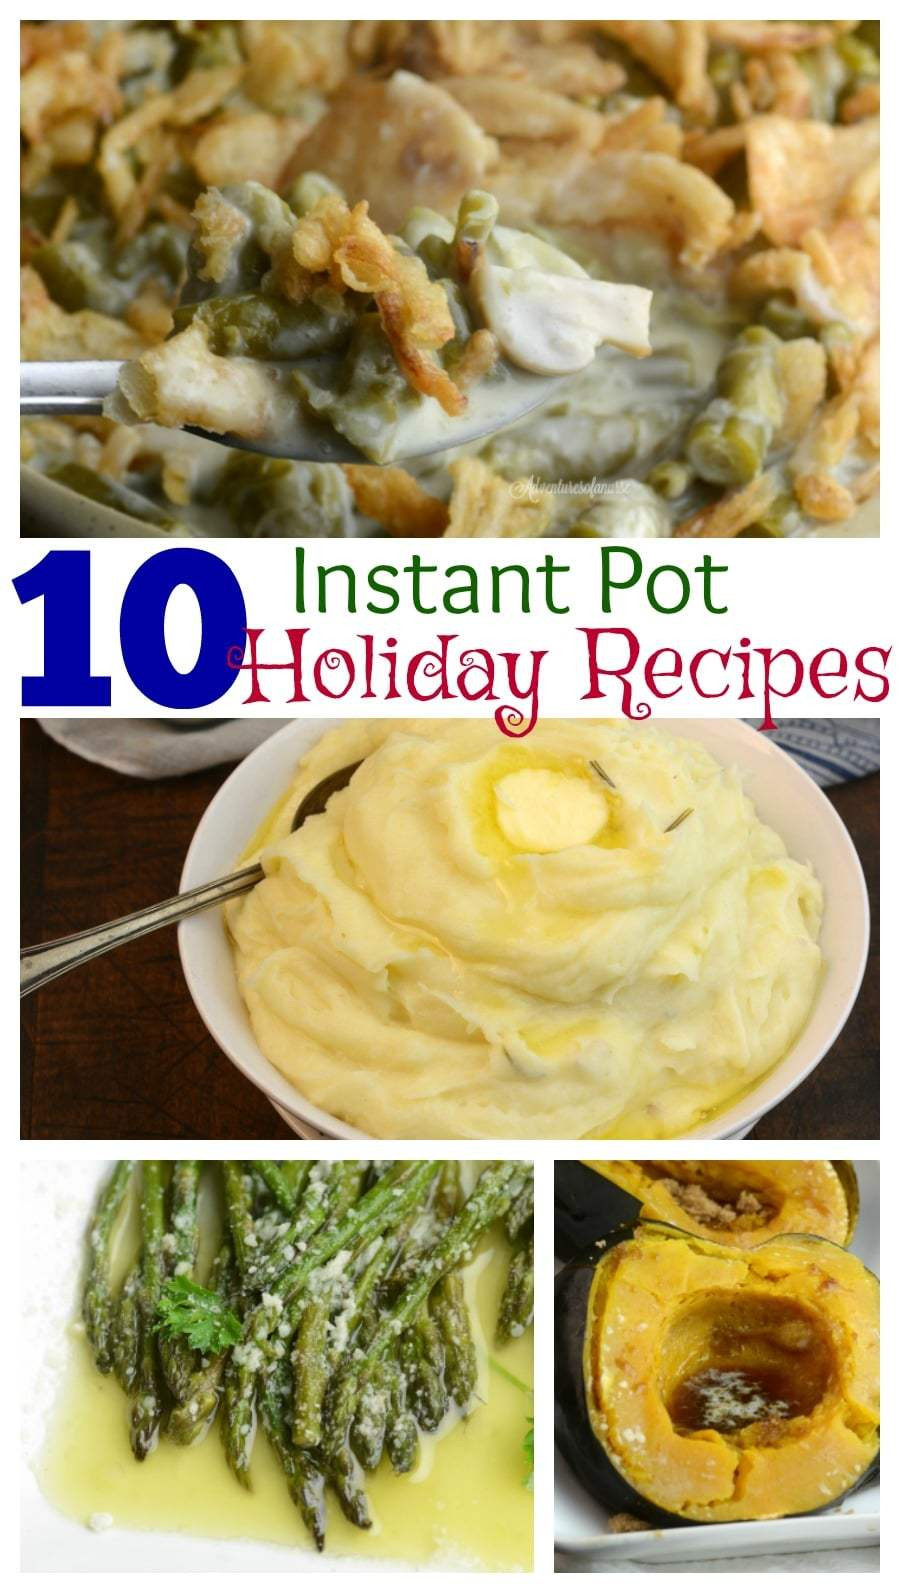 Instant Pot Christmas Recipes
 10 Holiday Instant Pot Must Have Recipes Adventures of a